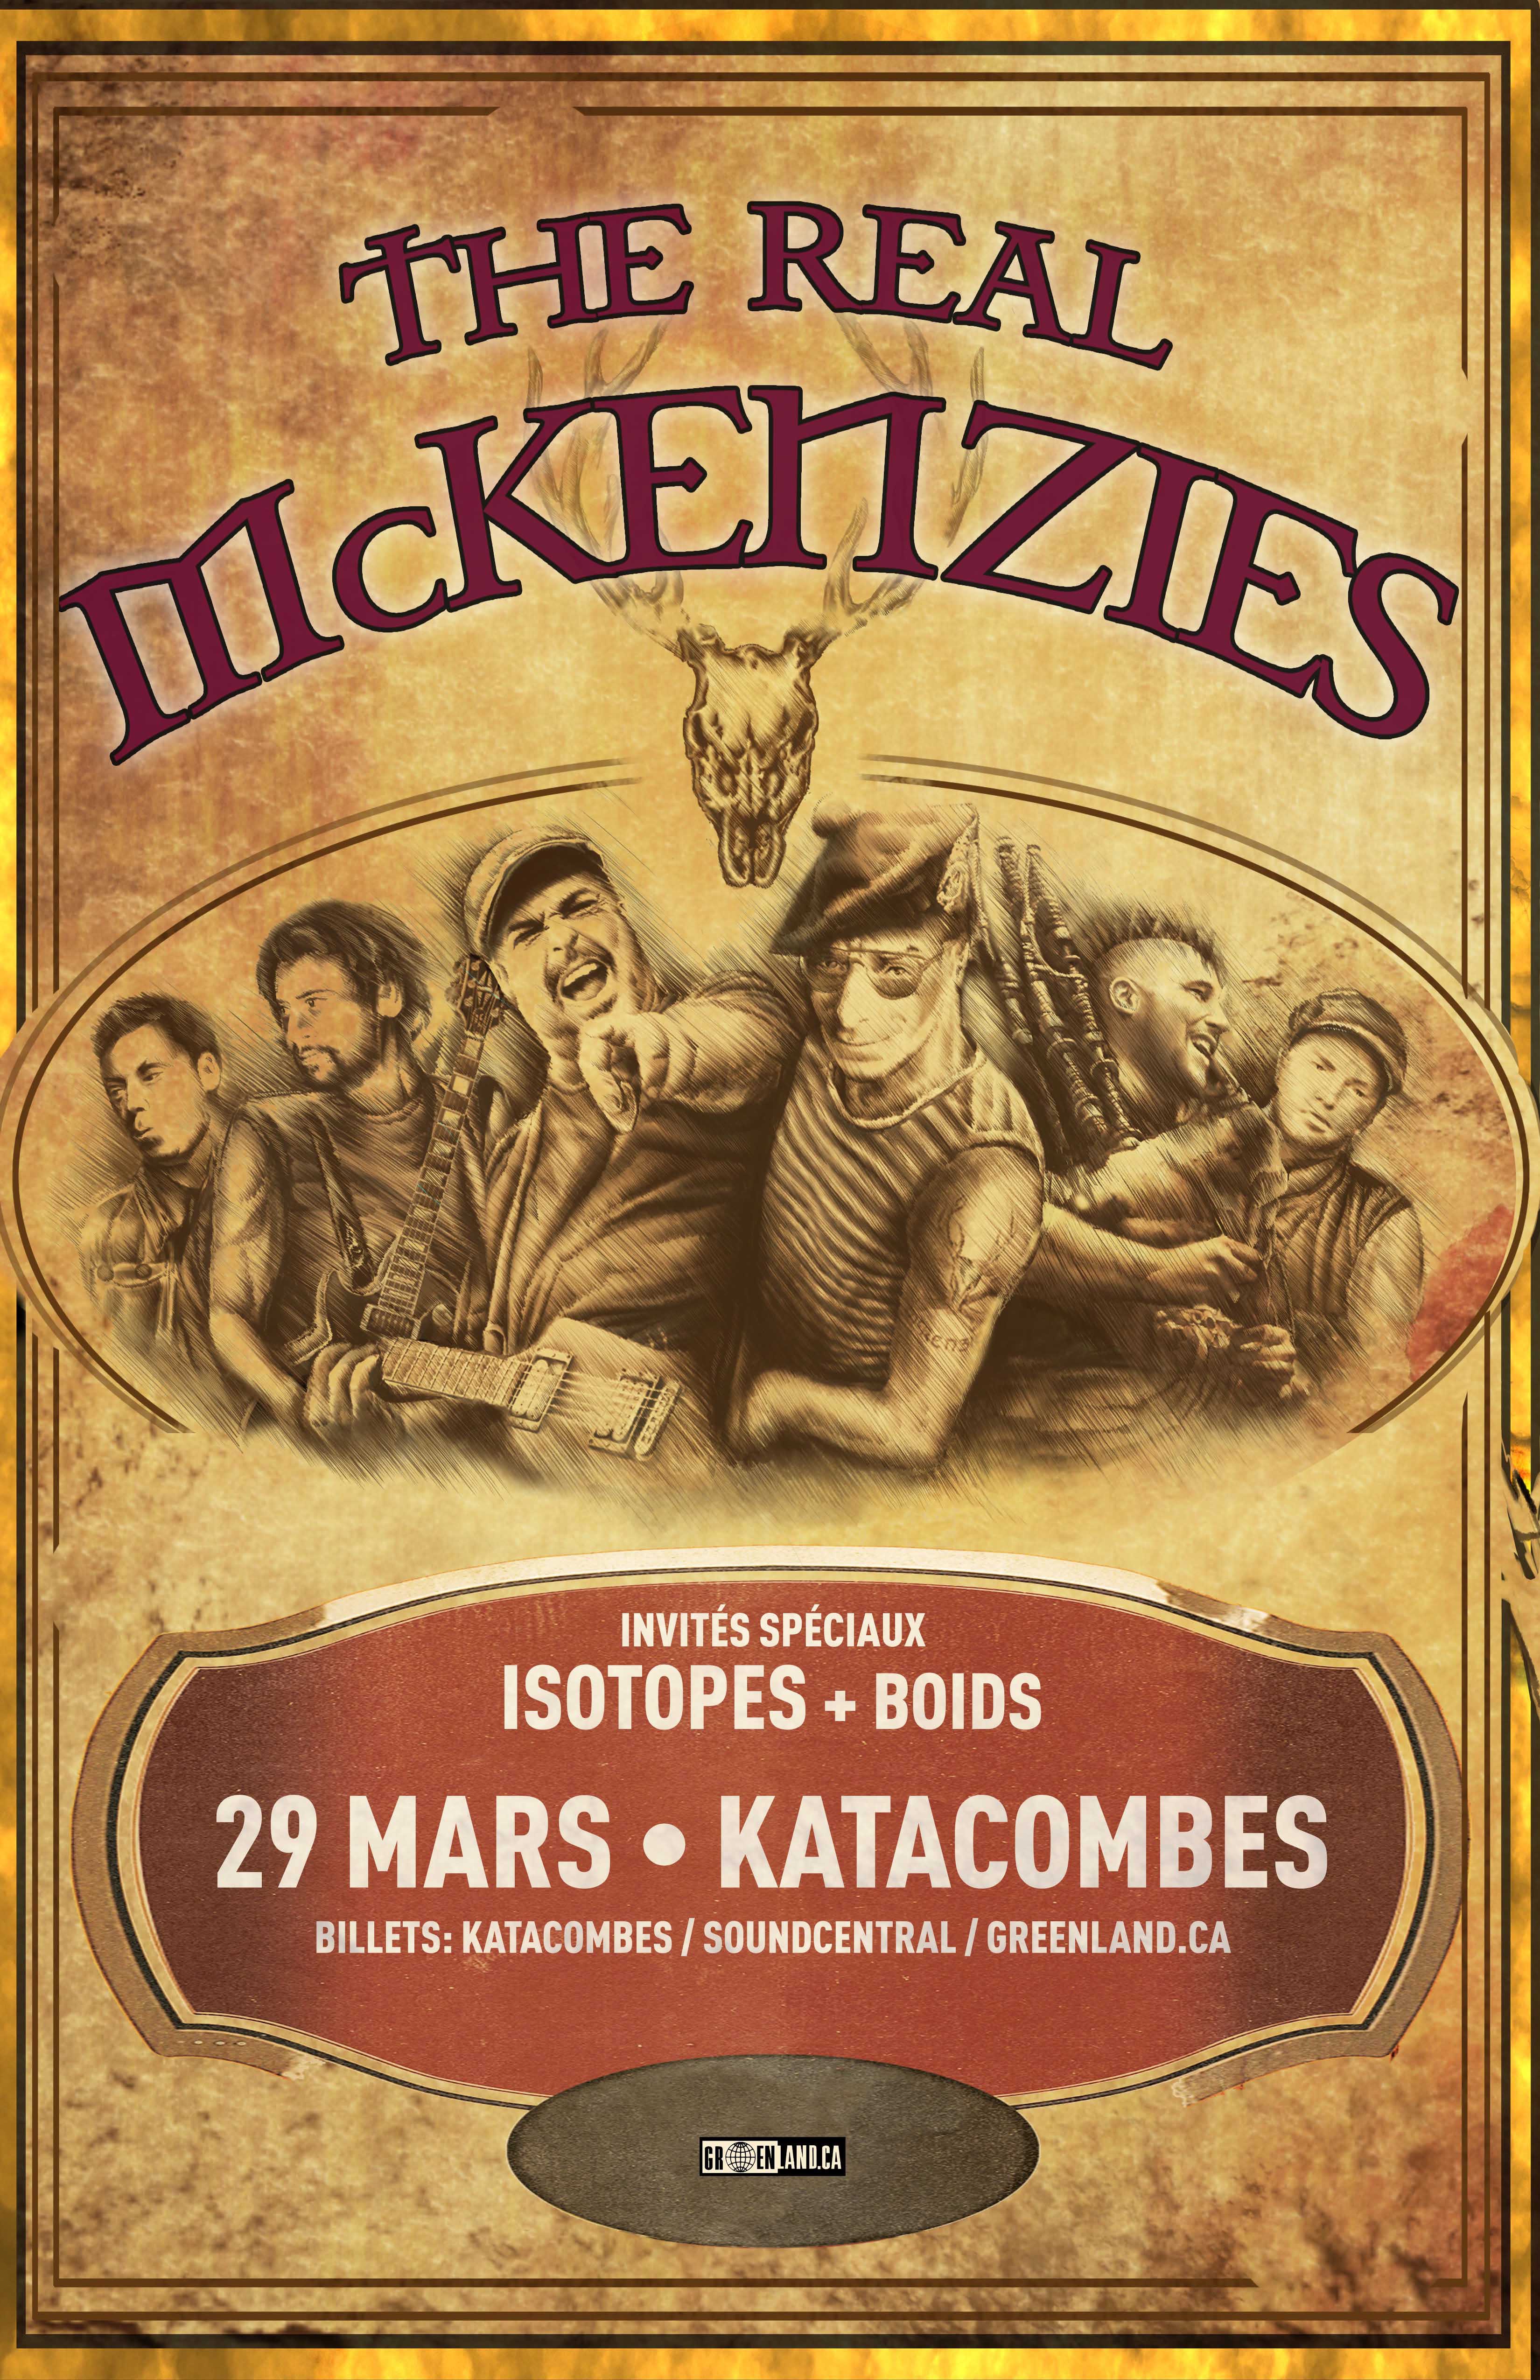 150329_TheRealMcKenzies_poster